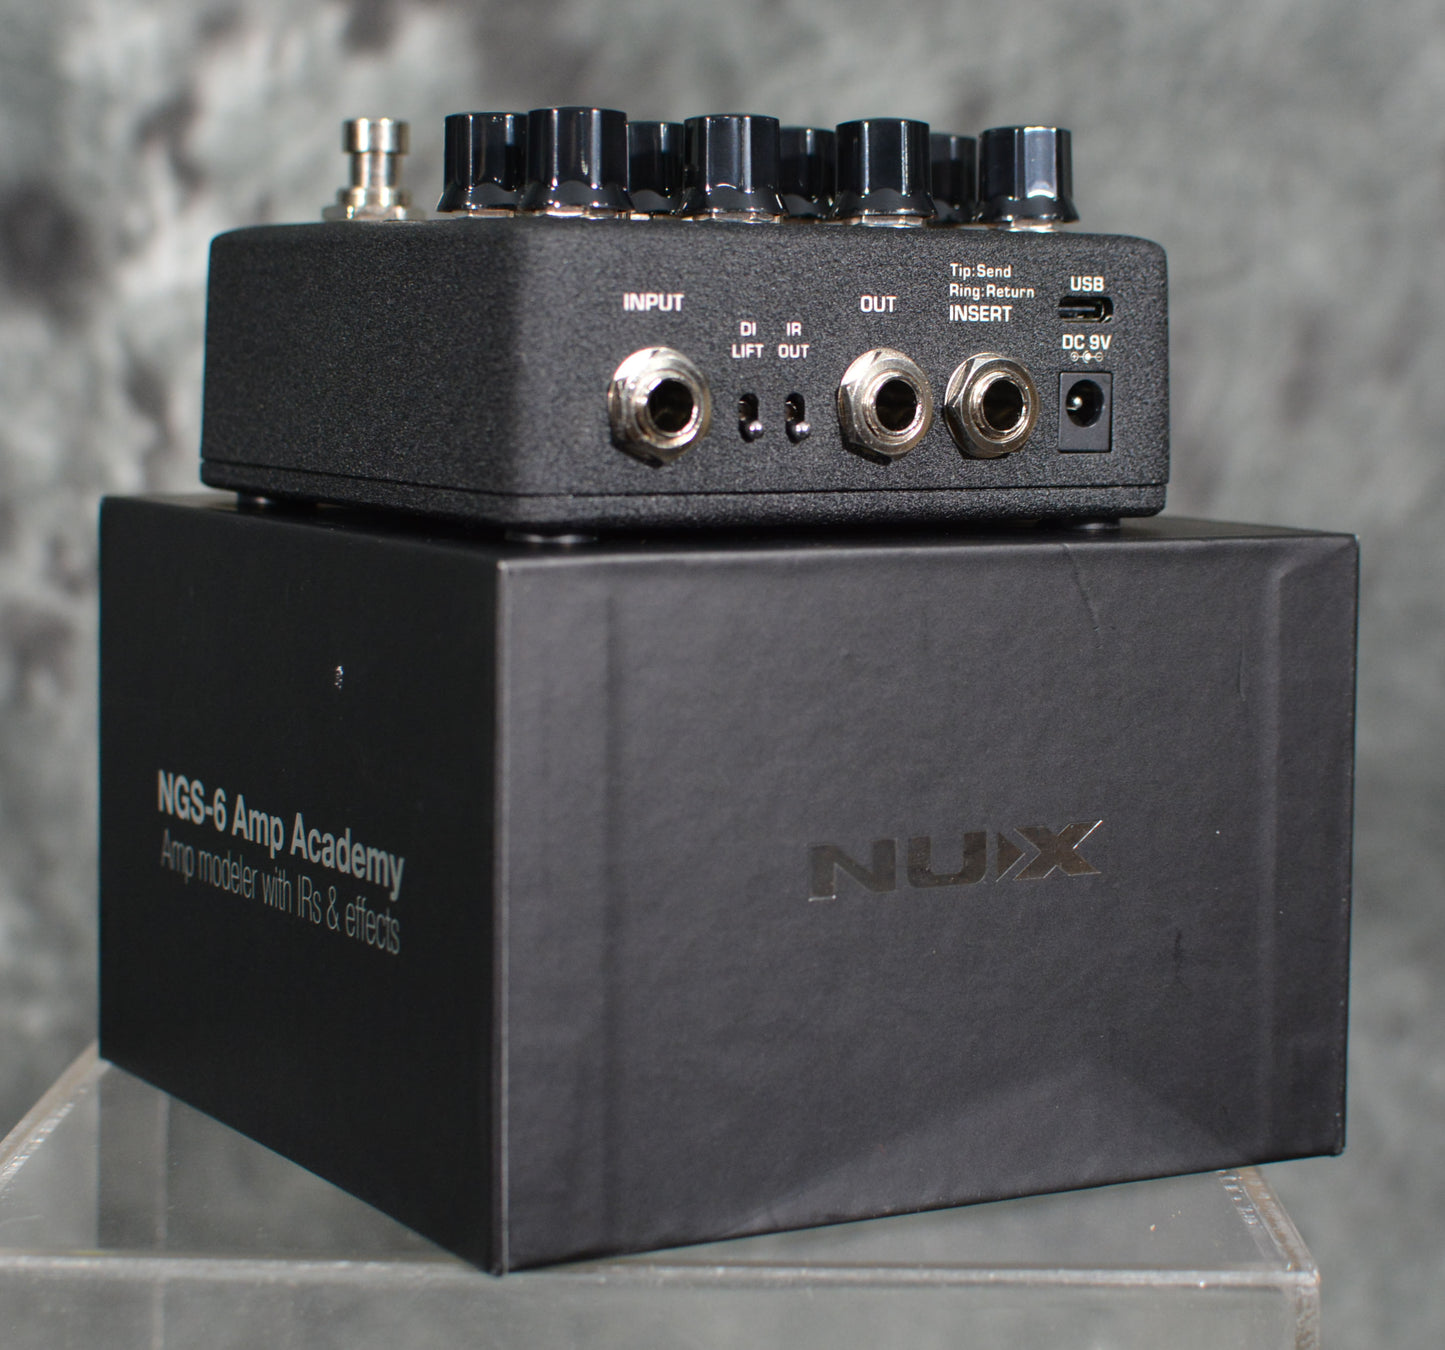 NuX NGS-6 Amp Academy Tube Amp Modeler w/ IR + Effects